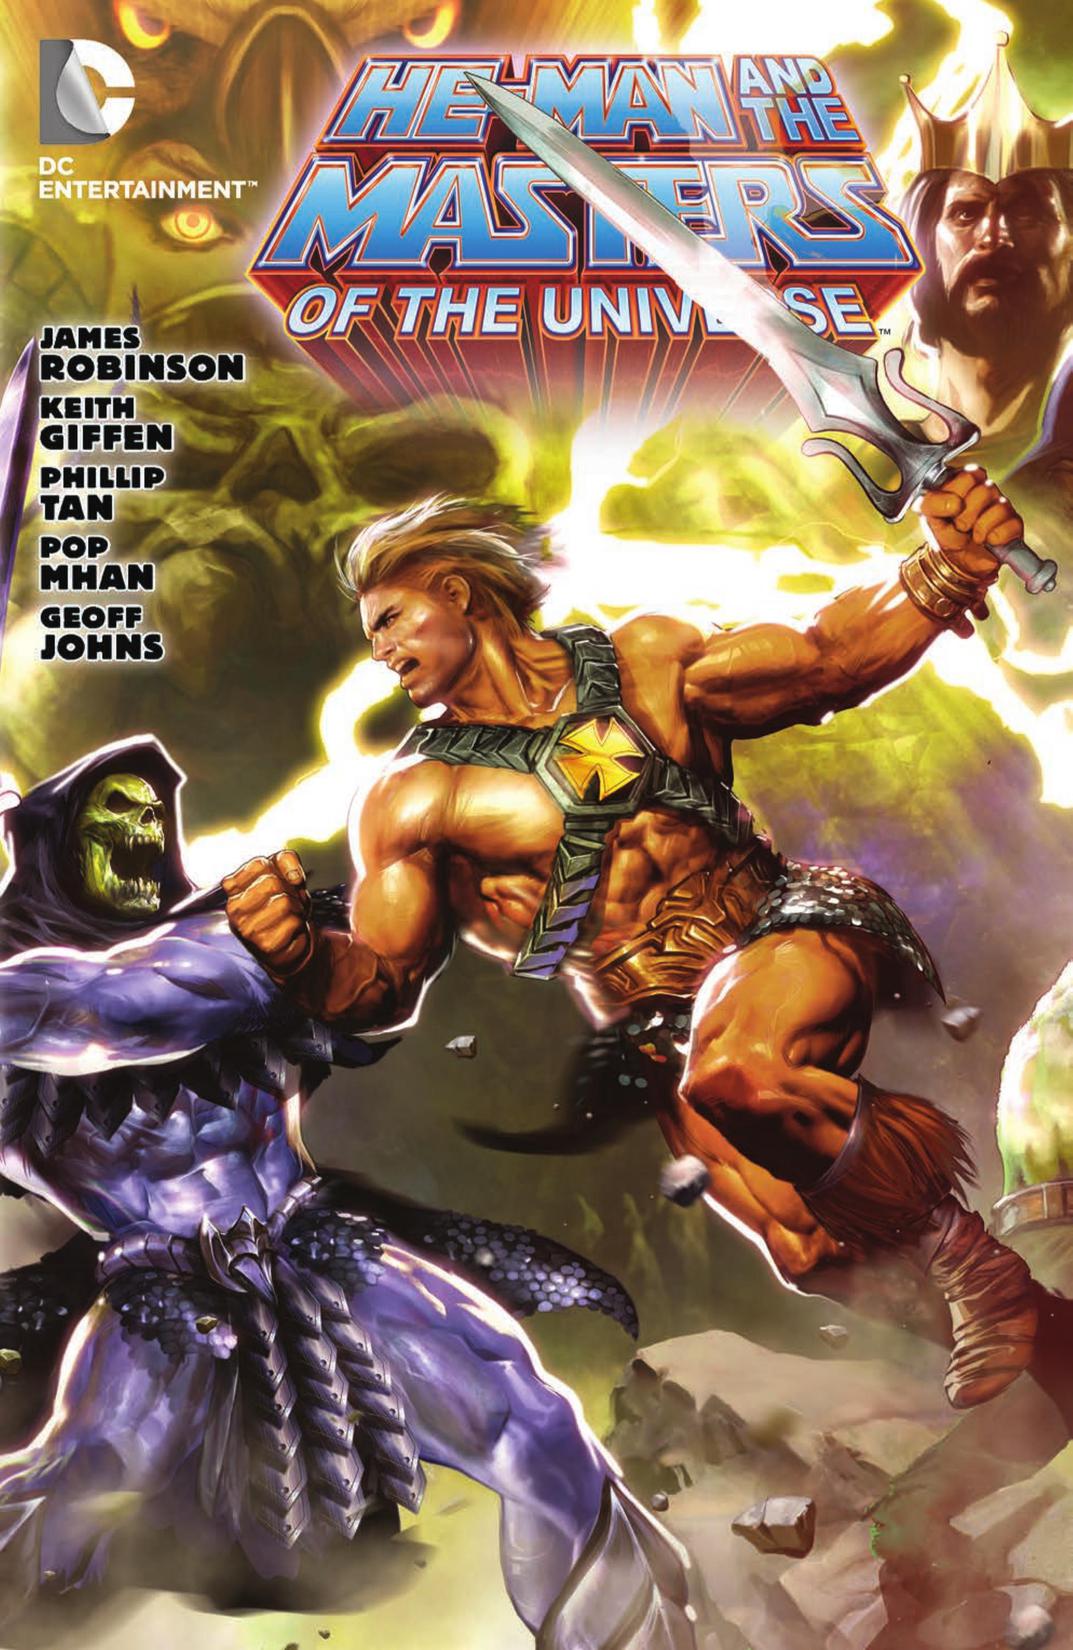 He-Man and the Masters of the Universe Vol. 1 preview images